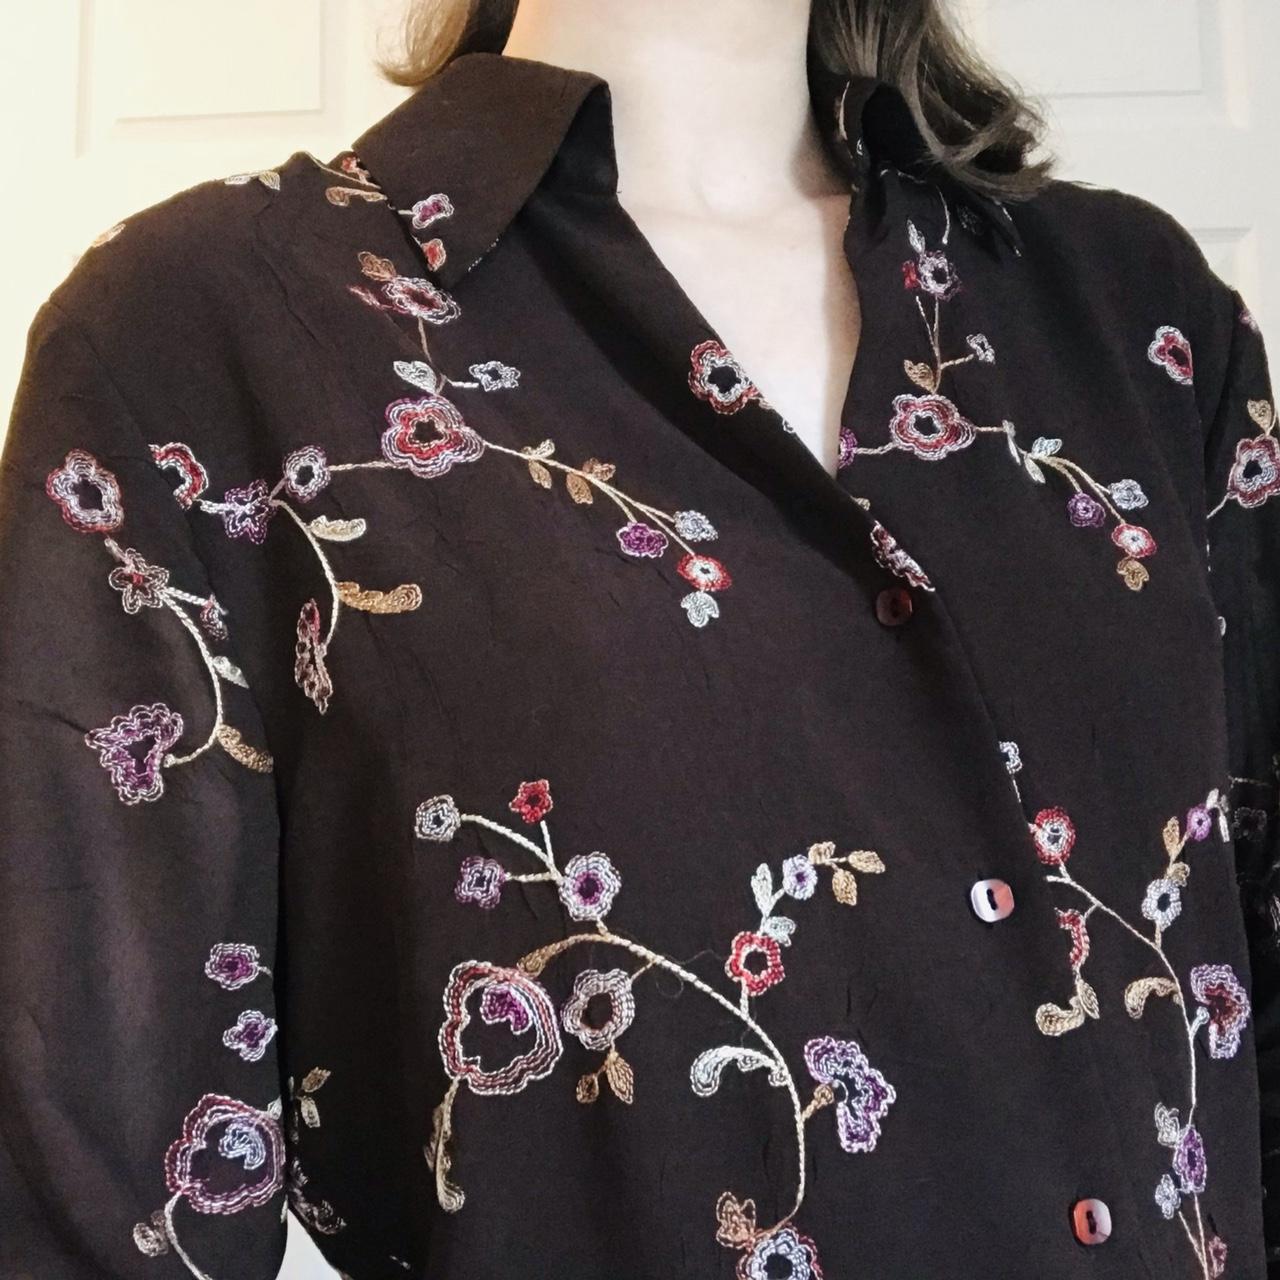 Product Image 1 - 90s button up top. Floral